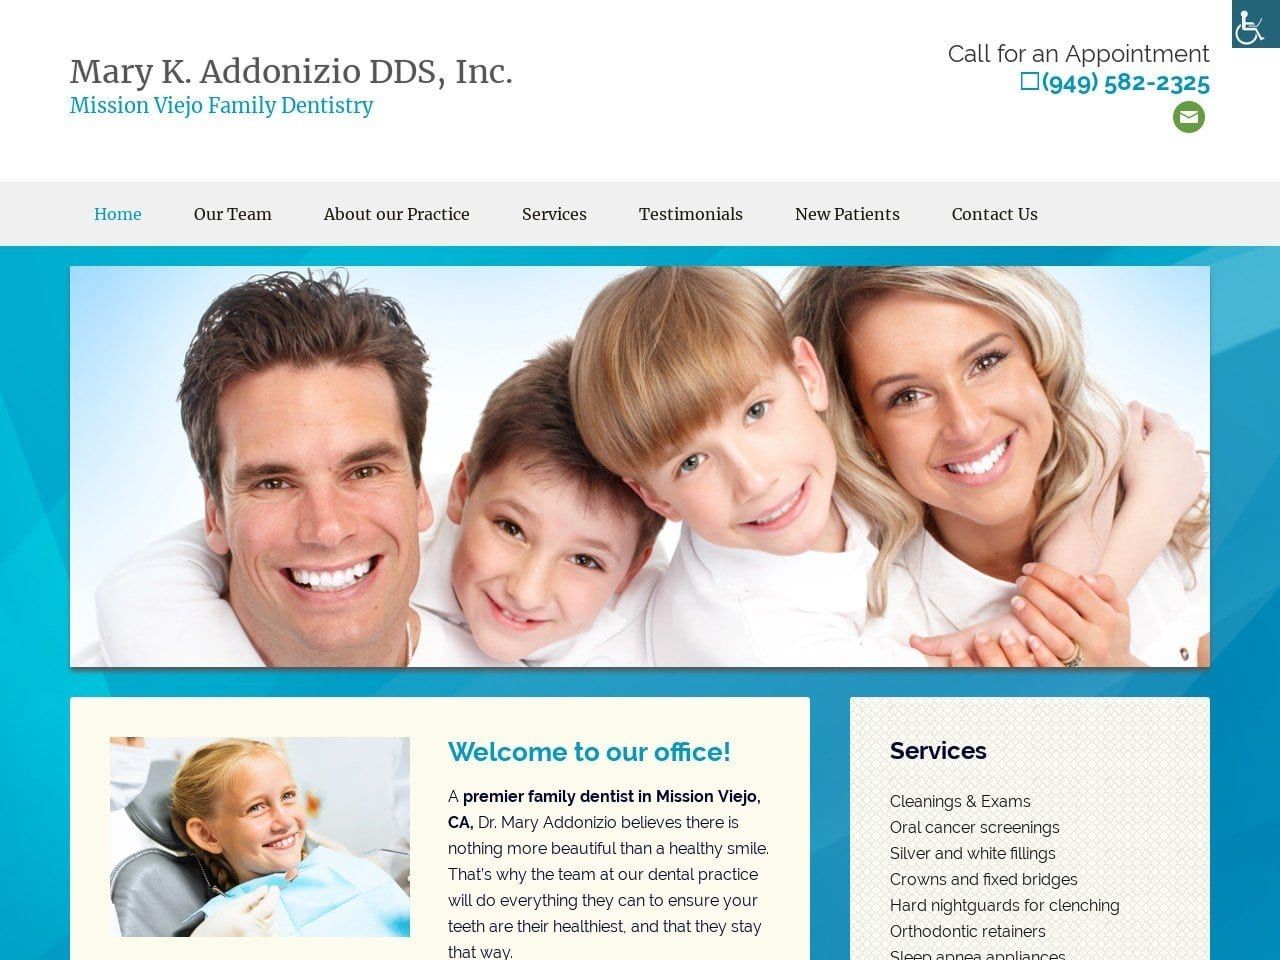 Dr. Mary K. Addonizio DDS Website Screenshot from thetoothmarydds.com